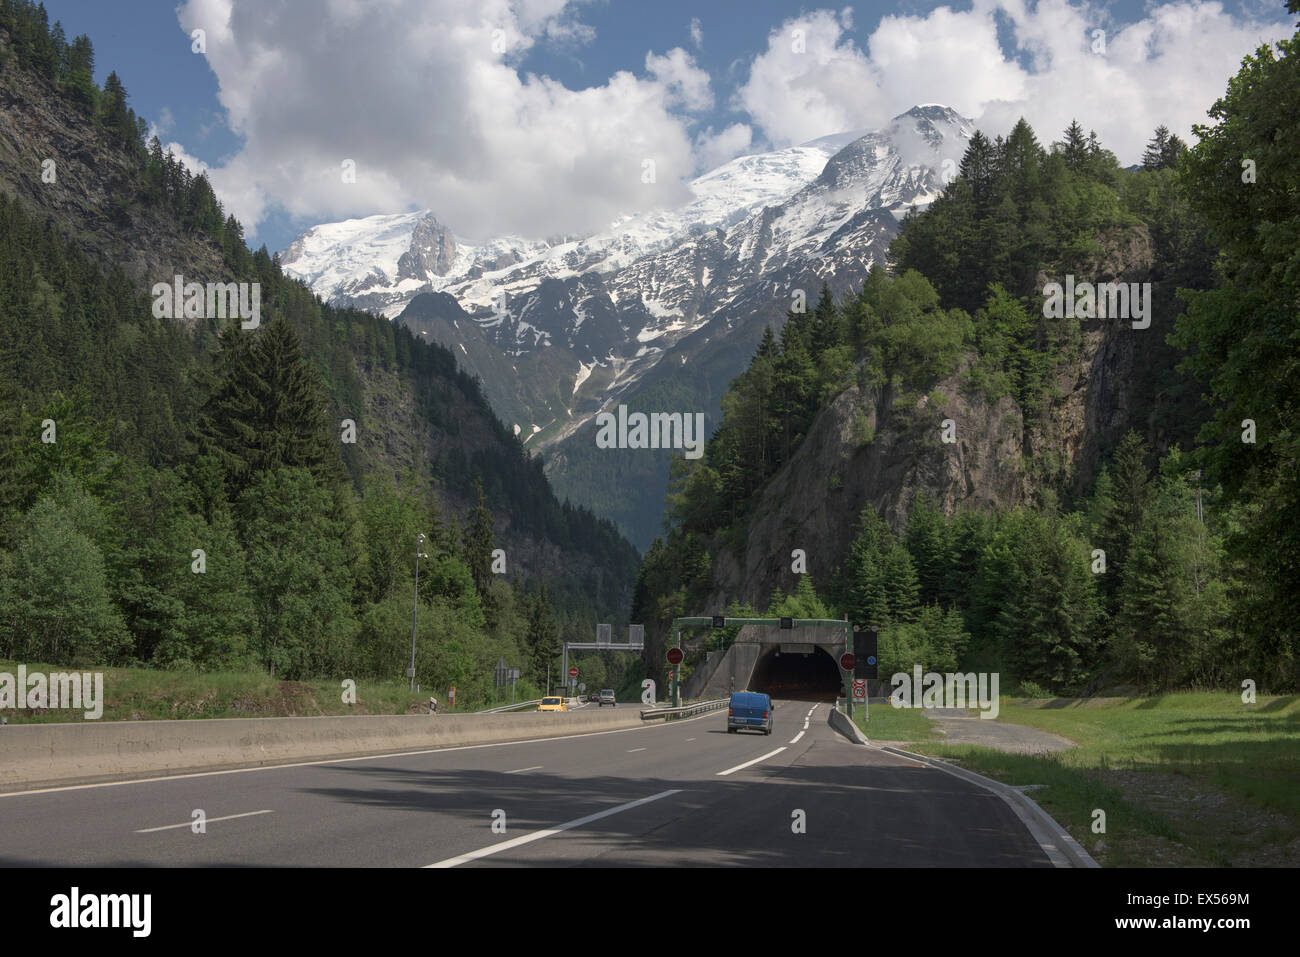 Mont Blanc in France or Monte Bianco in Italy on the French-Italian border at the head of the Aosta Valley in Italy. 6 June 2015 Stock Photo